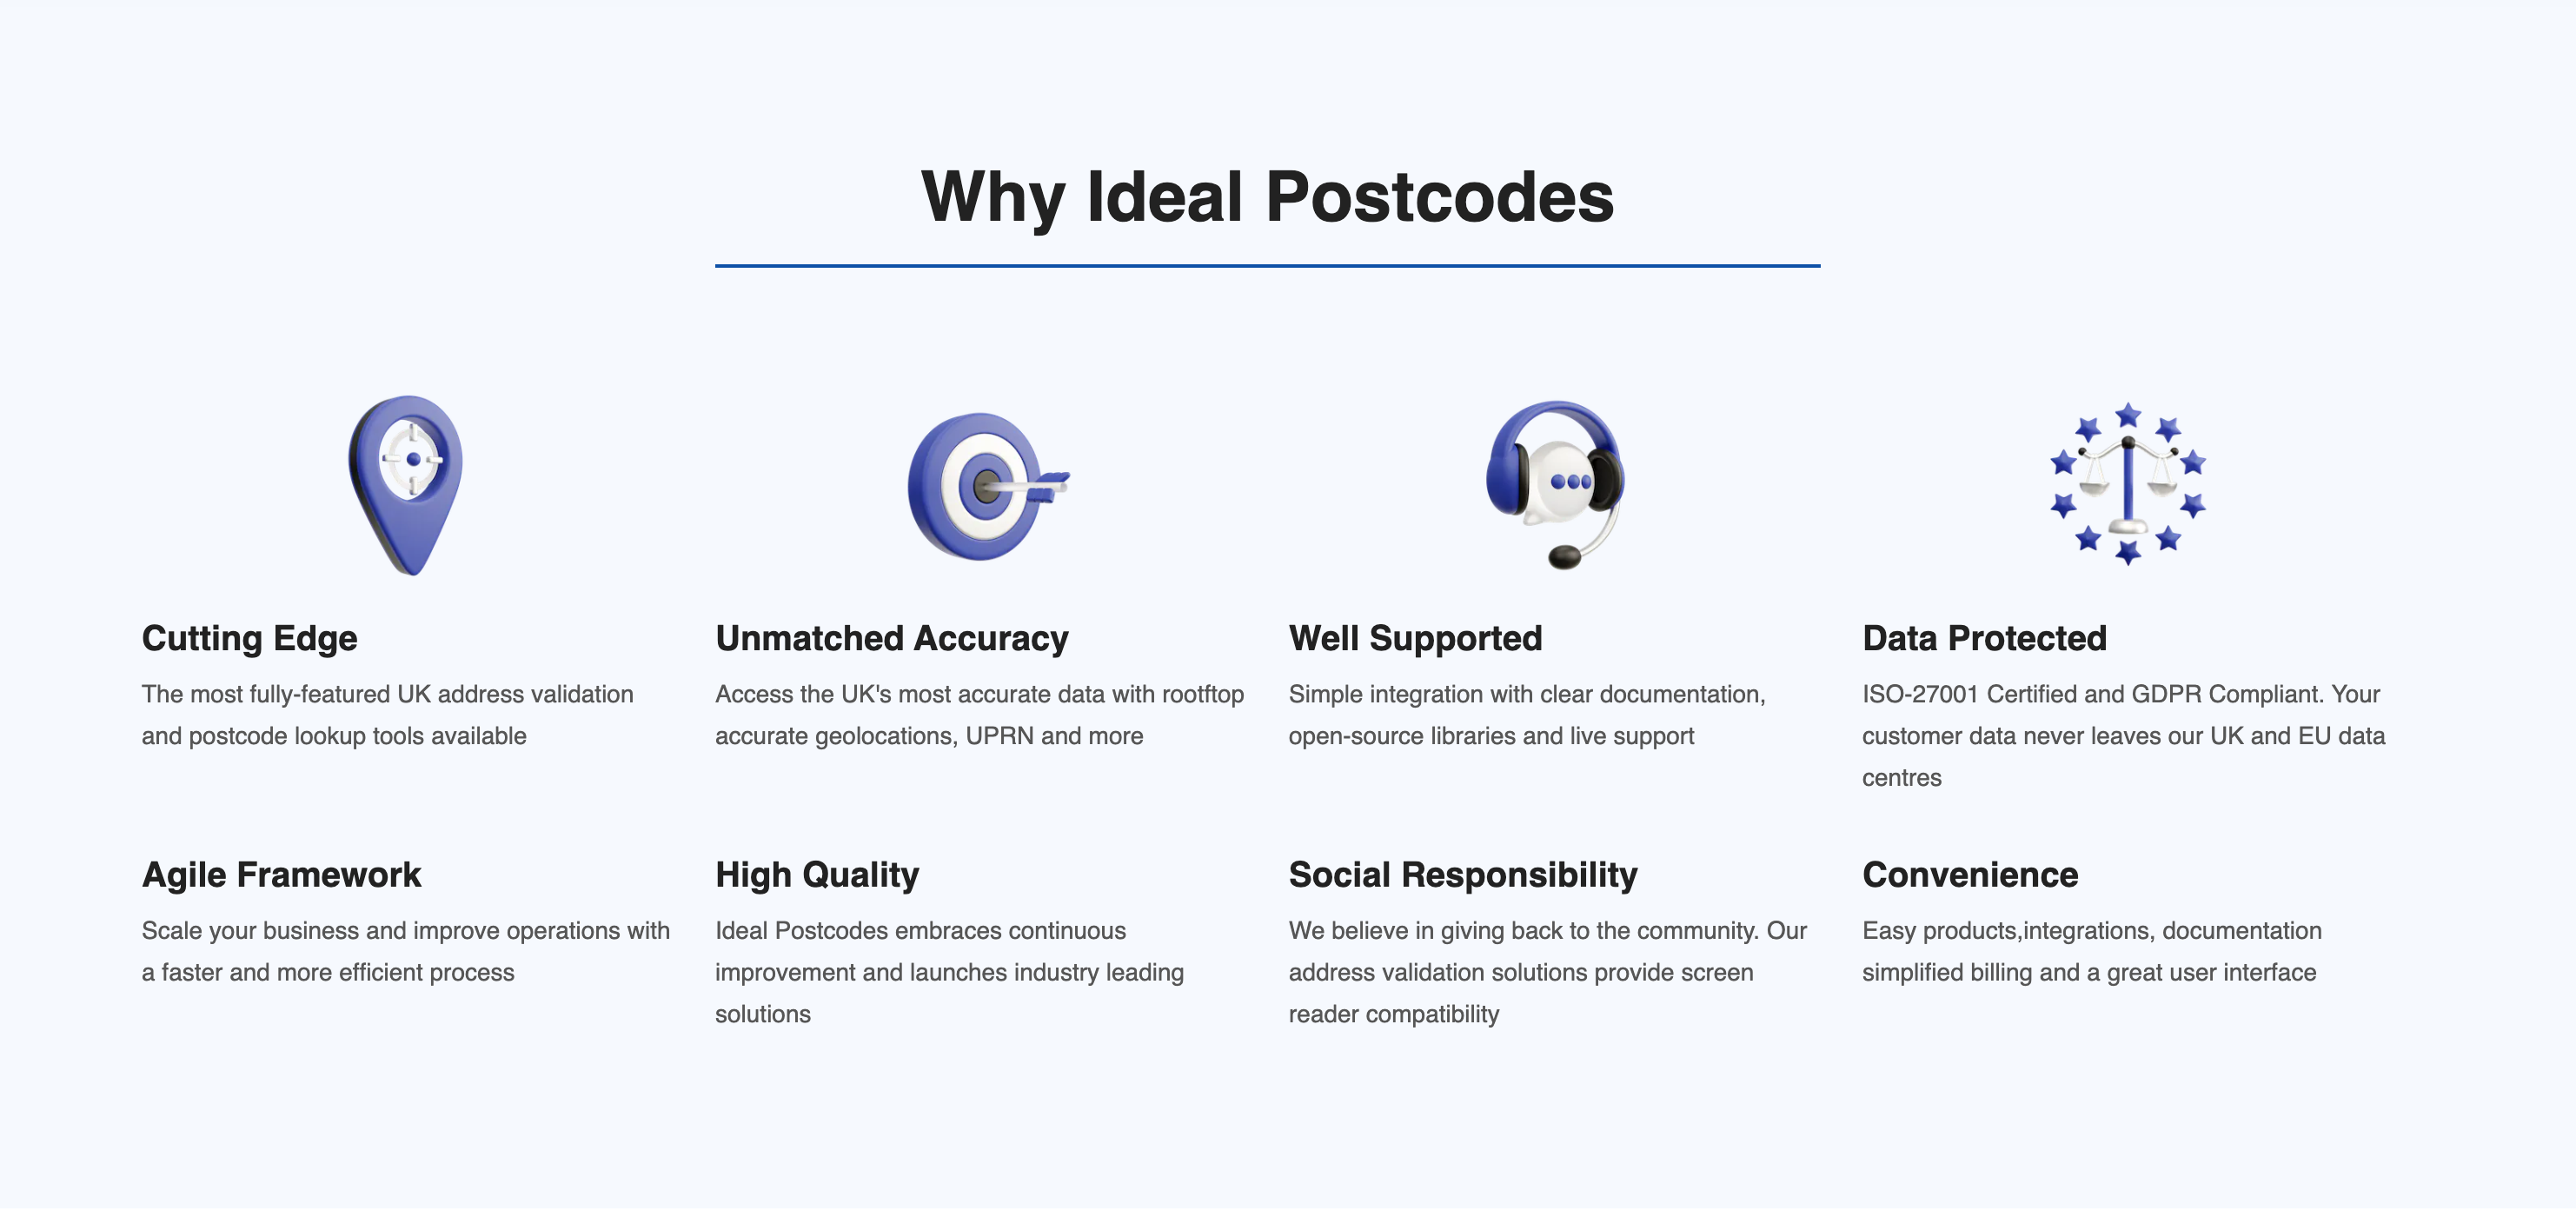 Why choose Ideal Postcodes